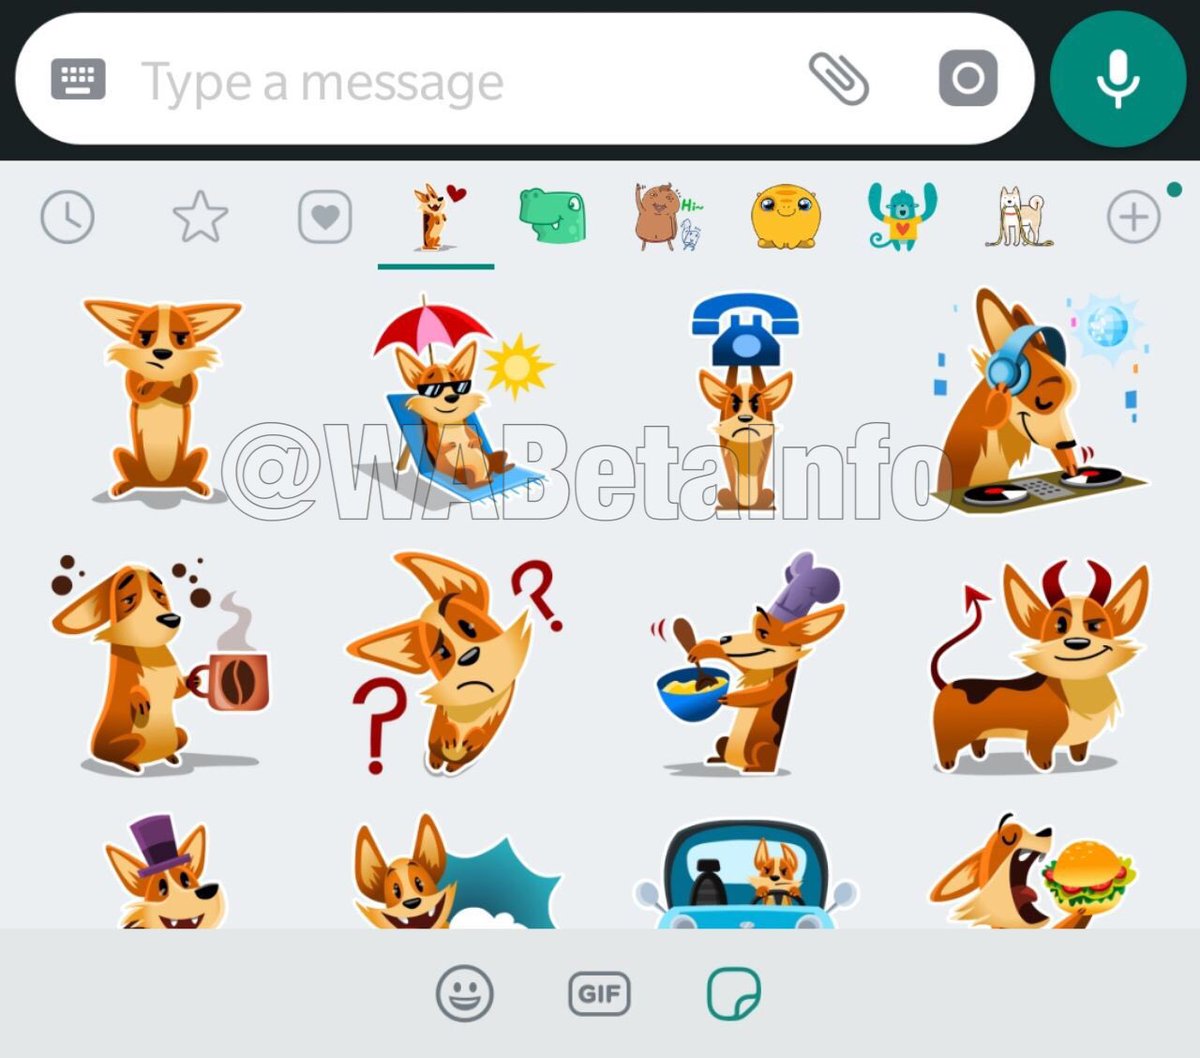 Wabetainfo On Twitter Whatsapp Has Added A New Stickers Pack